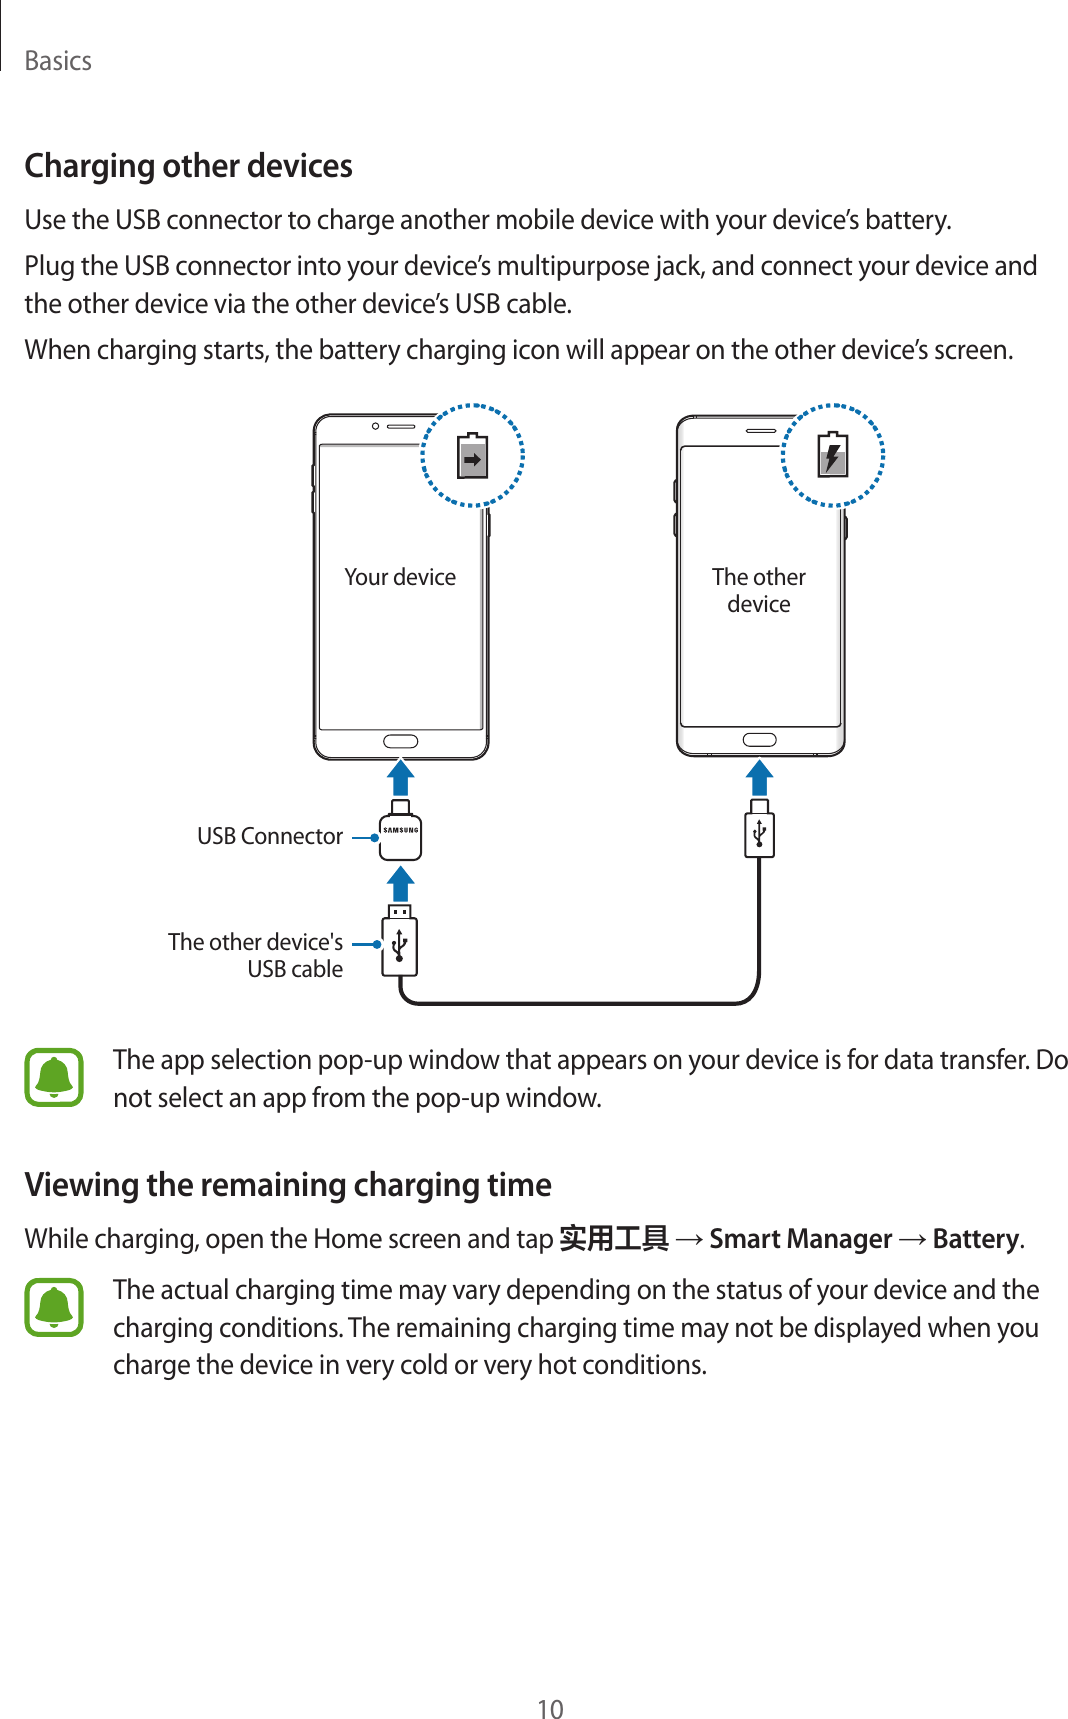 Basics10Charging other devicesUse the USB connector to charge another mobile device with your device’s battery.Plug the USB connector into your device’s multipurpose jack, and connect your device and the other device via the other device’s USB cable.When charging starts, the battery charging icon will appear on the other device’s screen.Your device The other deviceUSB ConnectorThe other device&apos;s USB cableThe app selection pop-up window that appears on your device is for data transfer. Do not select an app from the pop-up window.Viewing the remaining charging timeWhile charging, open the Home screen and tap 实用工具 → Smart Manager → Battery.The actual charging time may vary depending on the status of your device and the charging conditions. The remaining charging time may not be displayed when you charge the device in very cold or very hot conditions.